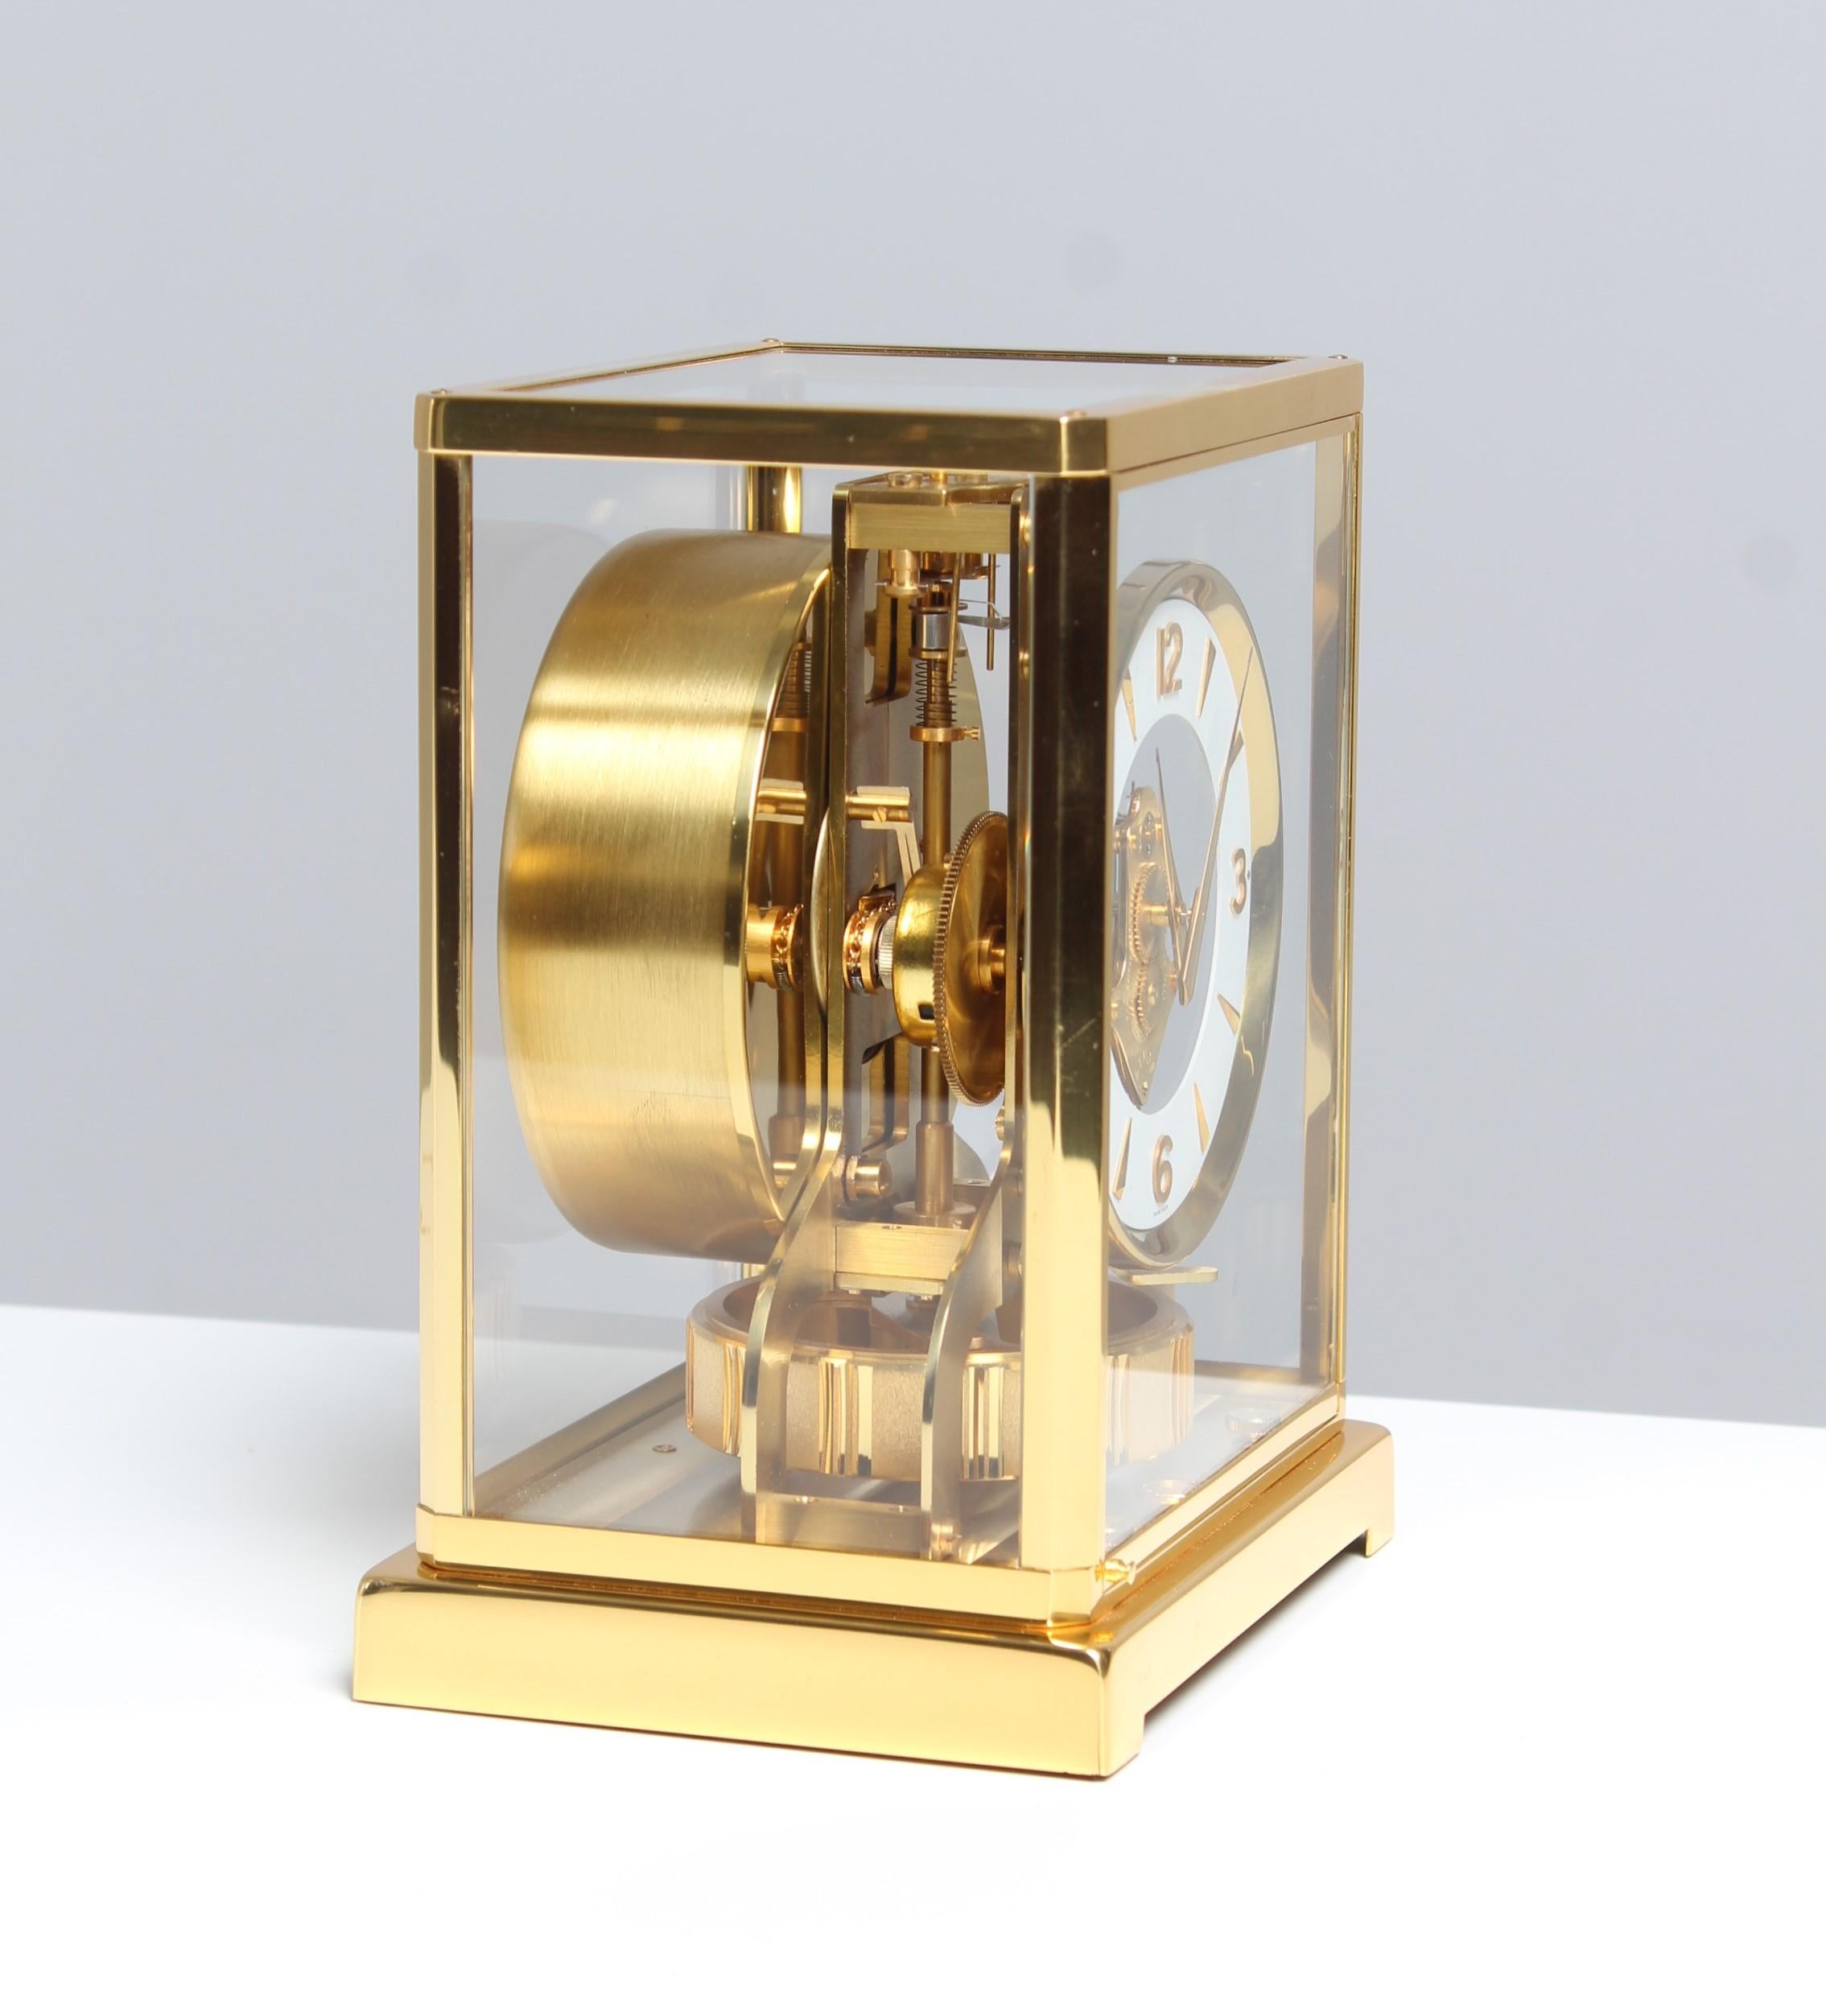 Swiss Atmos Clock by Jaeger Lecoultre, Manufactured in 1973